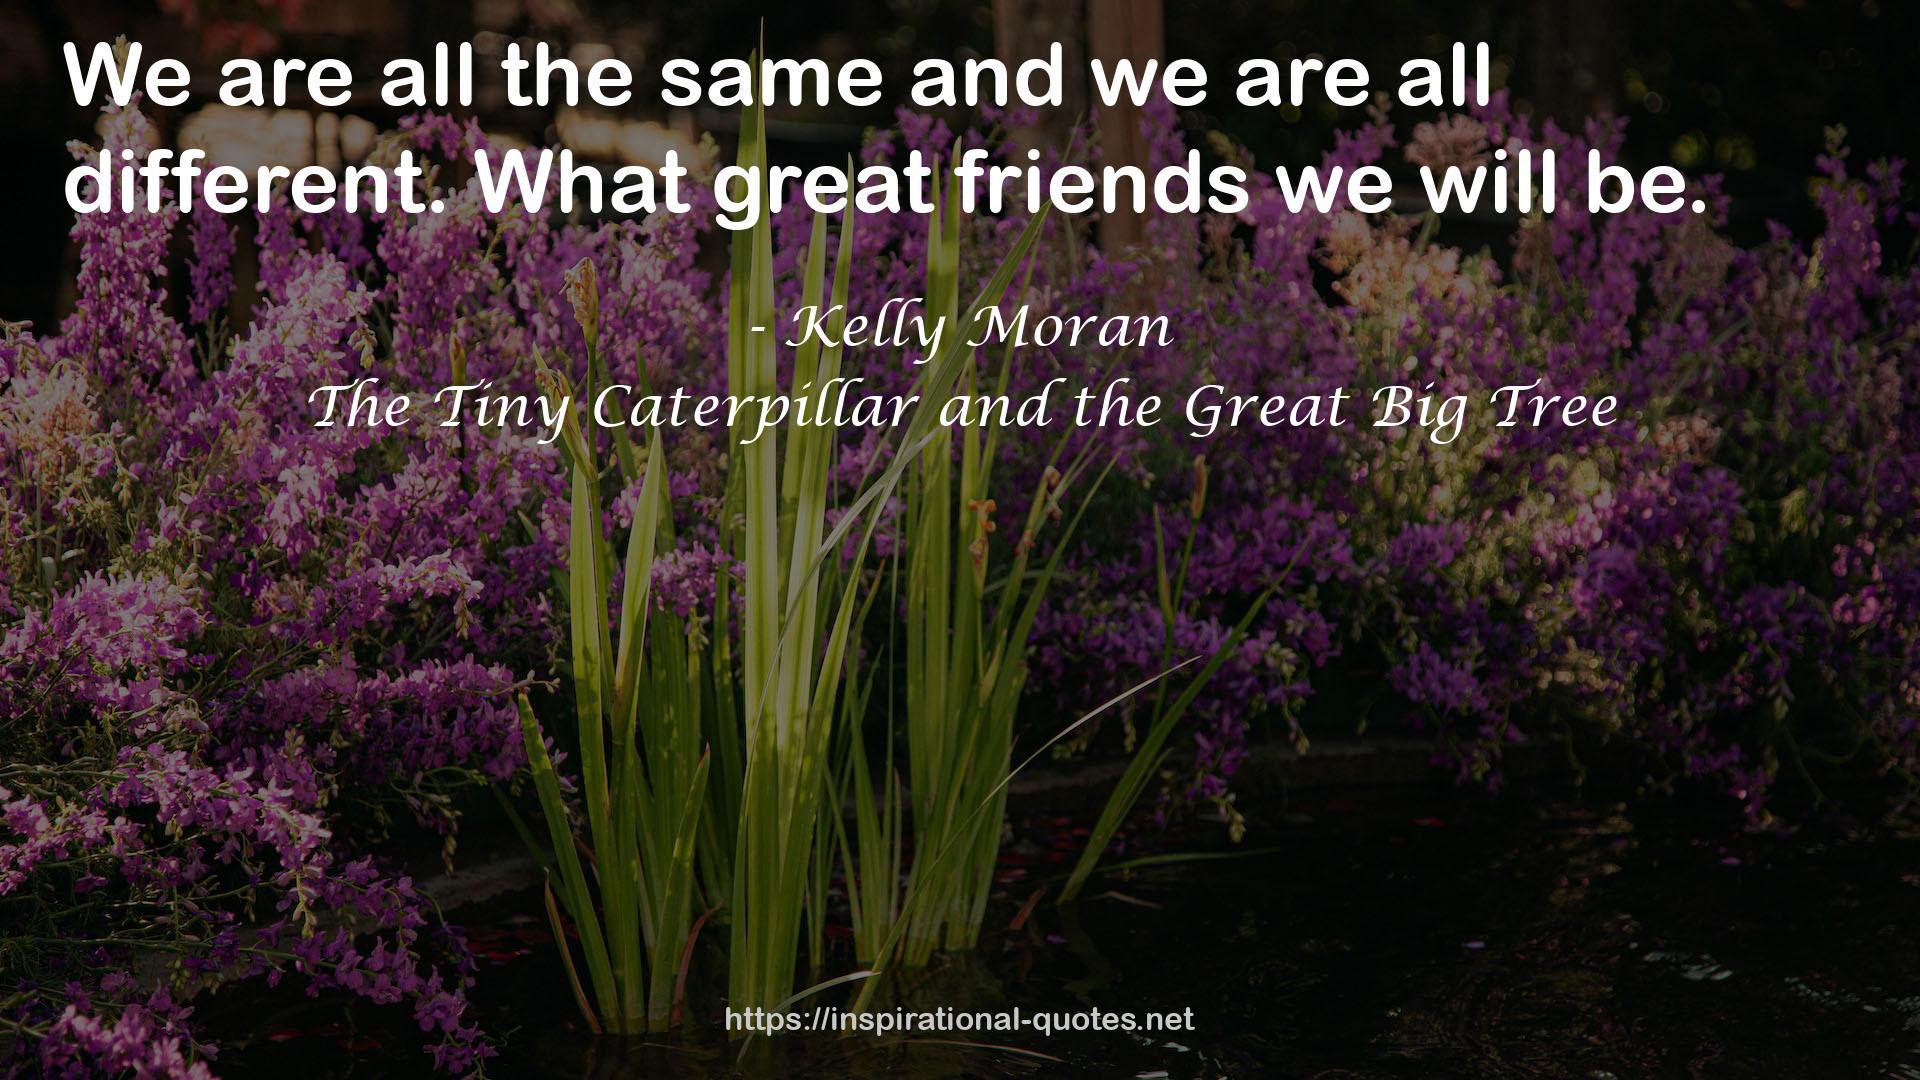 The Tiny Caterpillar and the Great Big Tree QUOTES